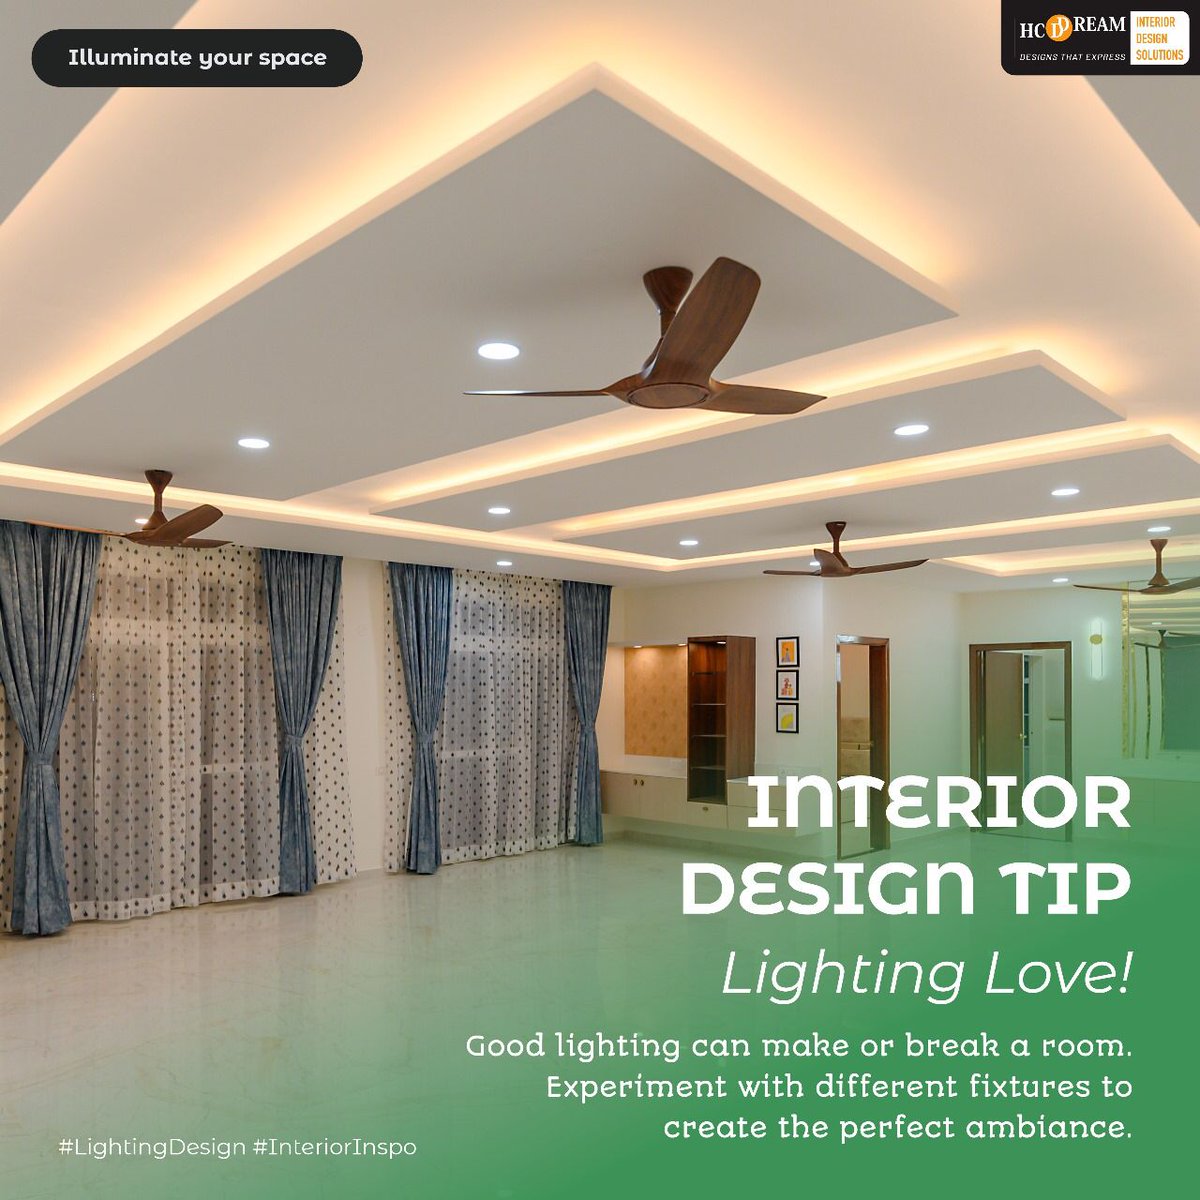 Interior Design Tip

Lighting Love: Good lighting can make or break a room.

Experiment with different light fixtures to create the perfect ambiance.

#LightingGoals #AmbianceMatters #LightingDesign  #InteriorDesignTip #DesignTrends #LightingLove #HCDDREAMInteriorSolutions